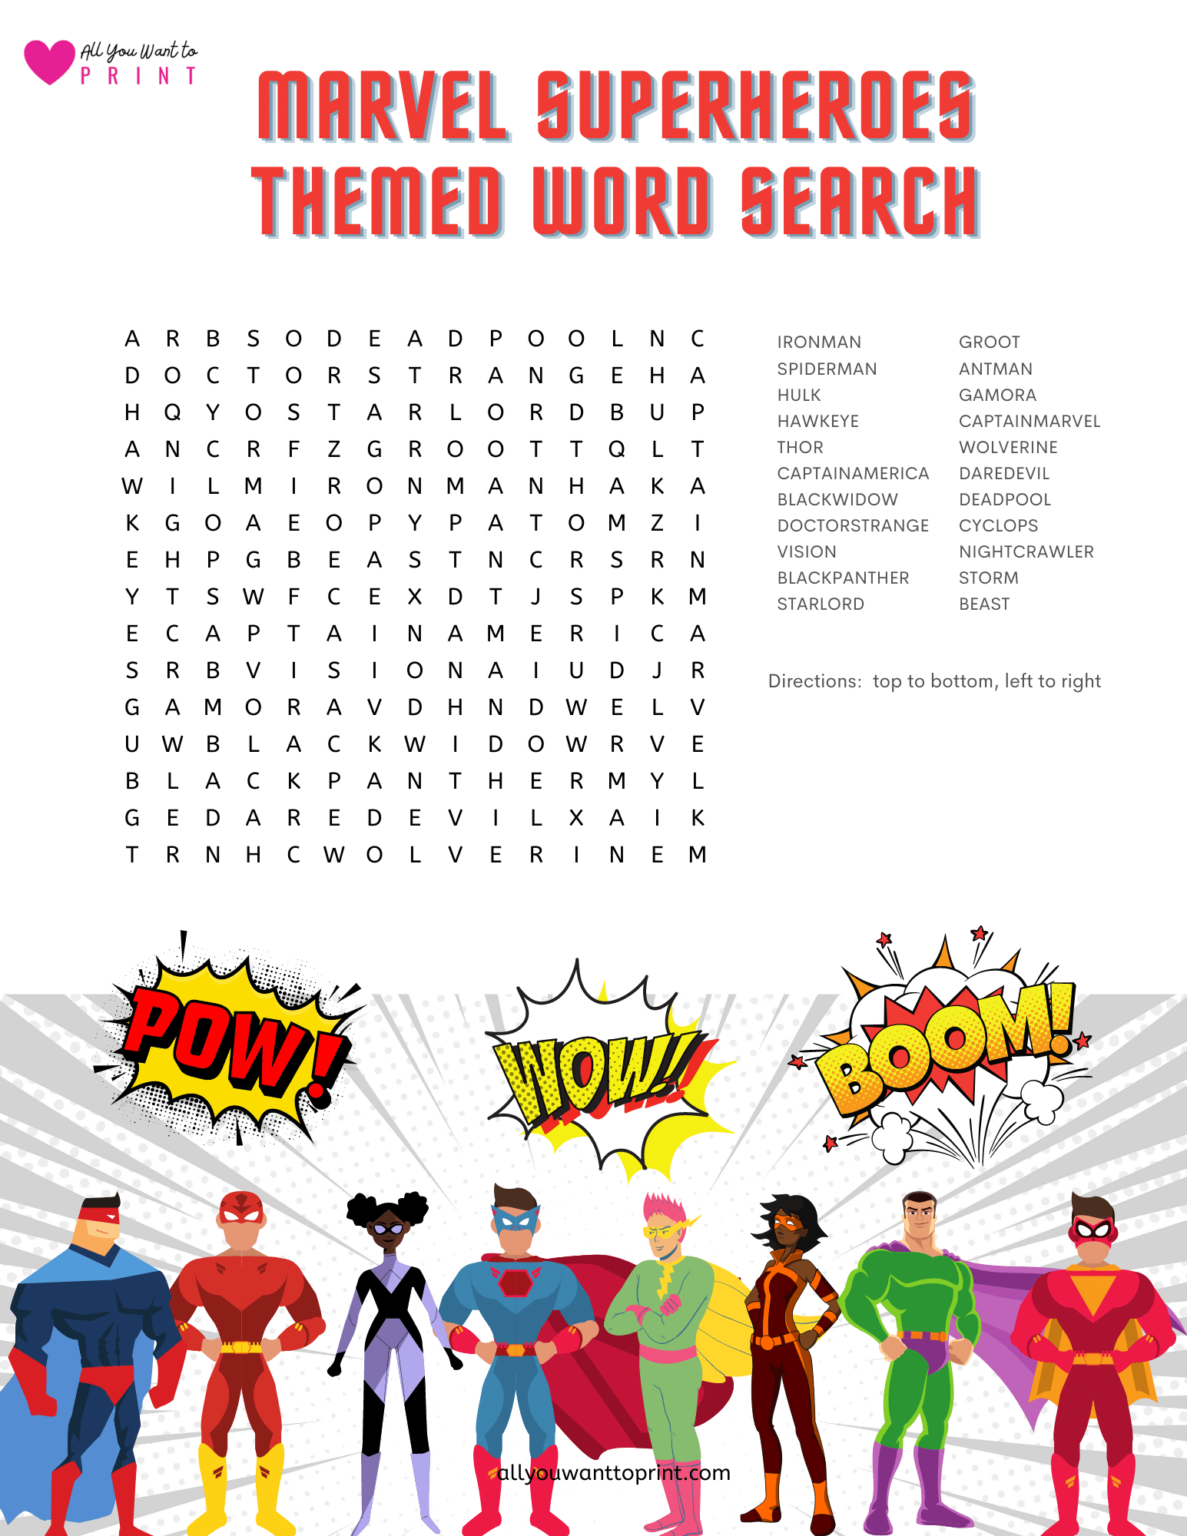 Marvel Superheroes Themed Word Search Free Printable